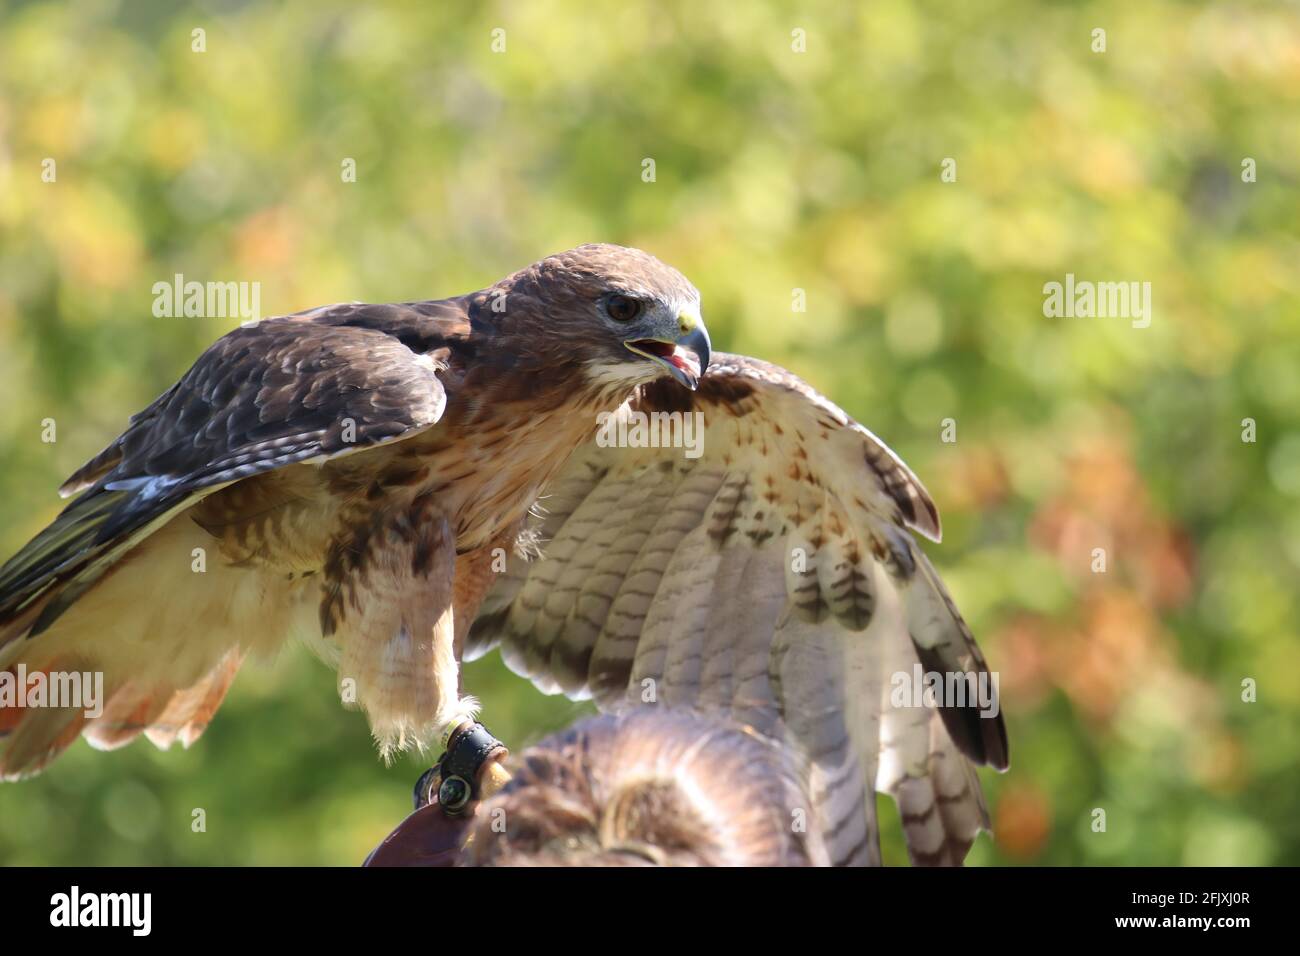 Red tailed hawk with wings spread Stock Photo